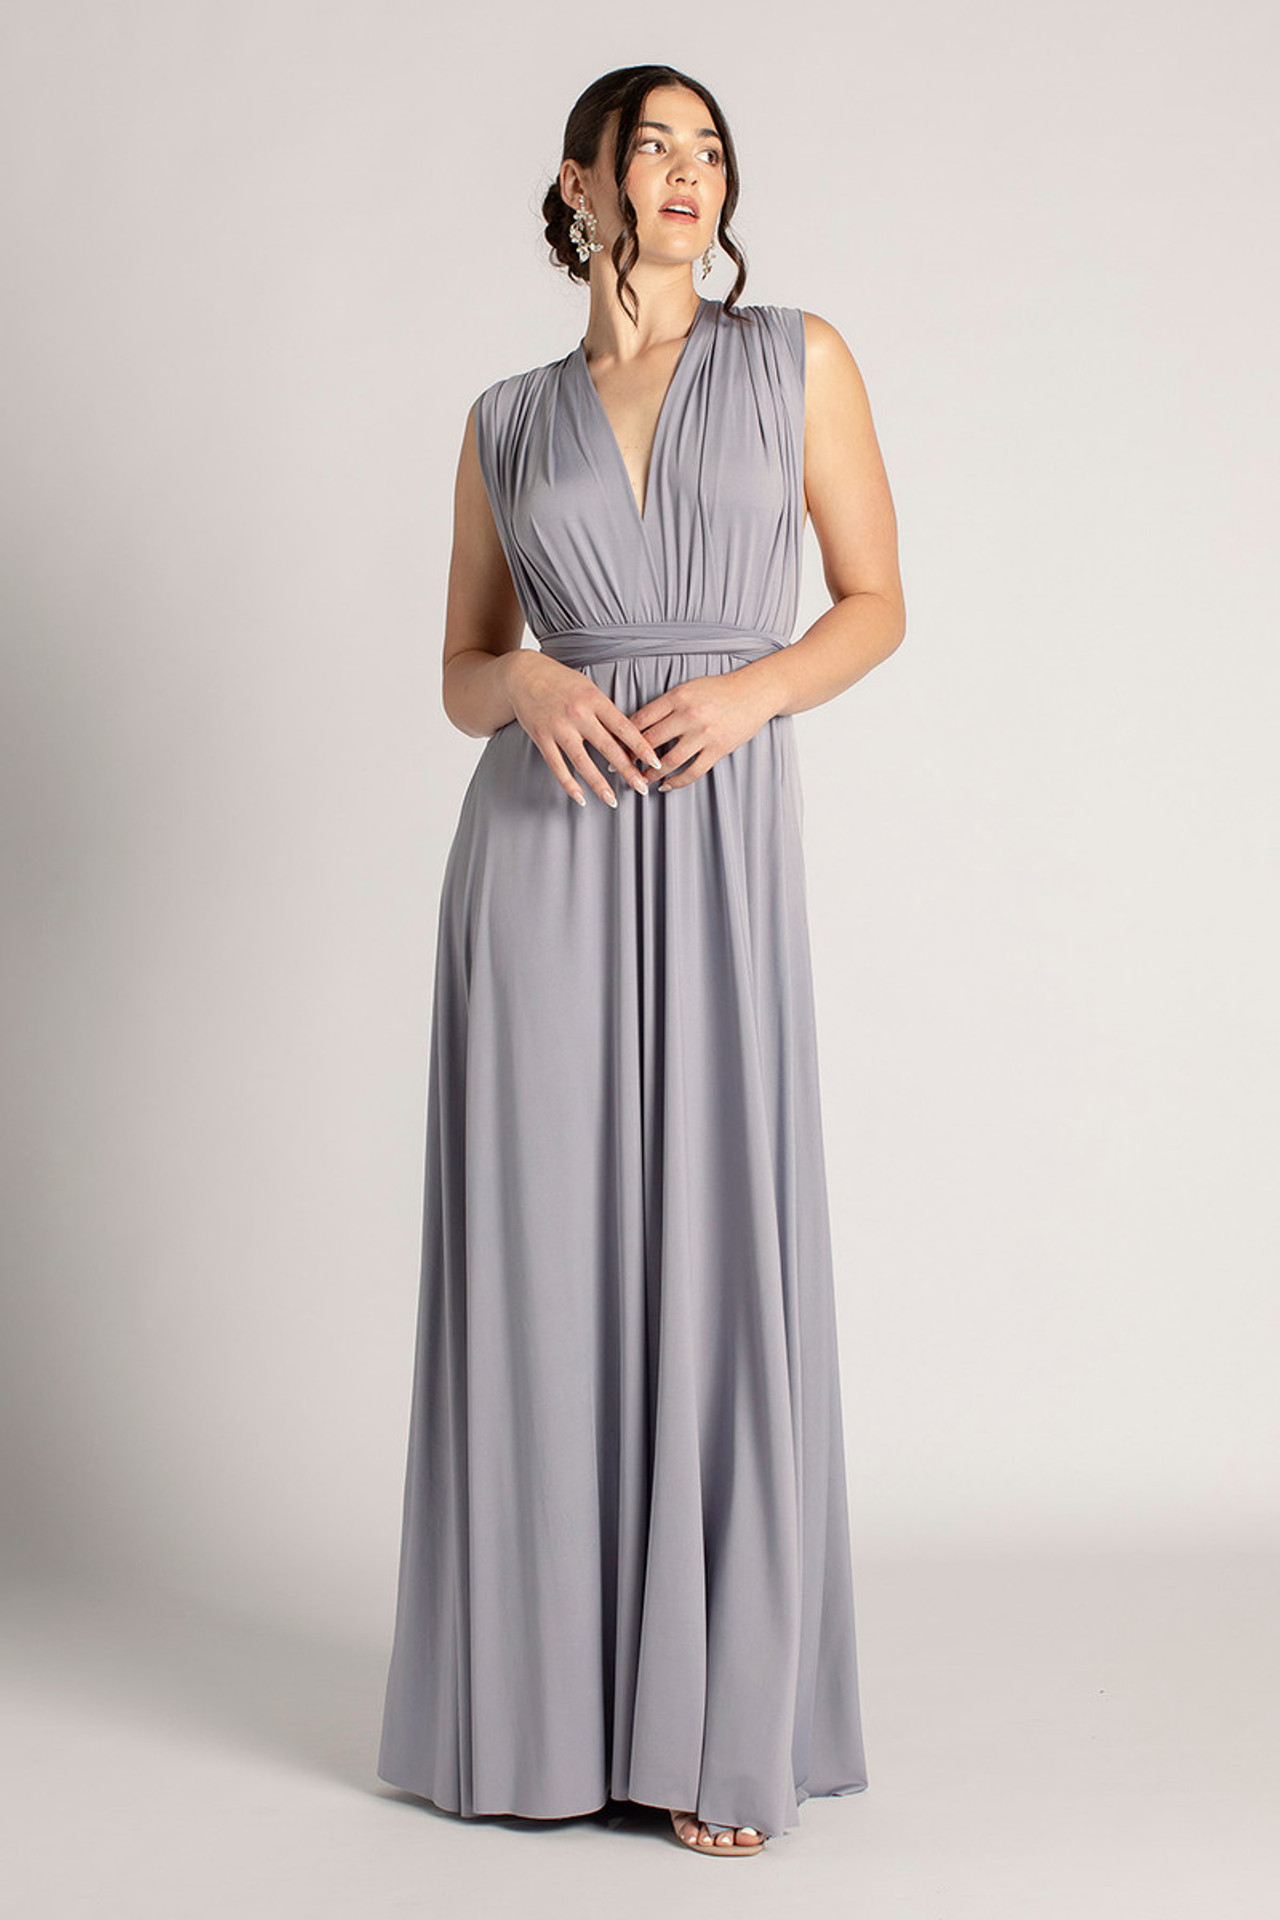 Classic Multiway Infinity Bridesmaid Dress In Graphite - Formal Dresses ...